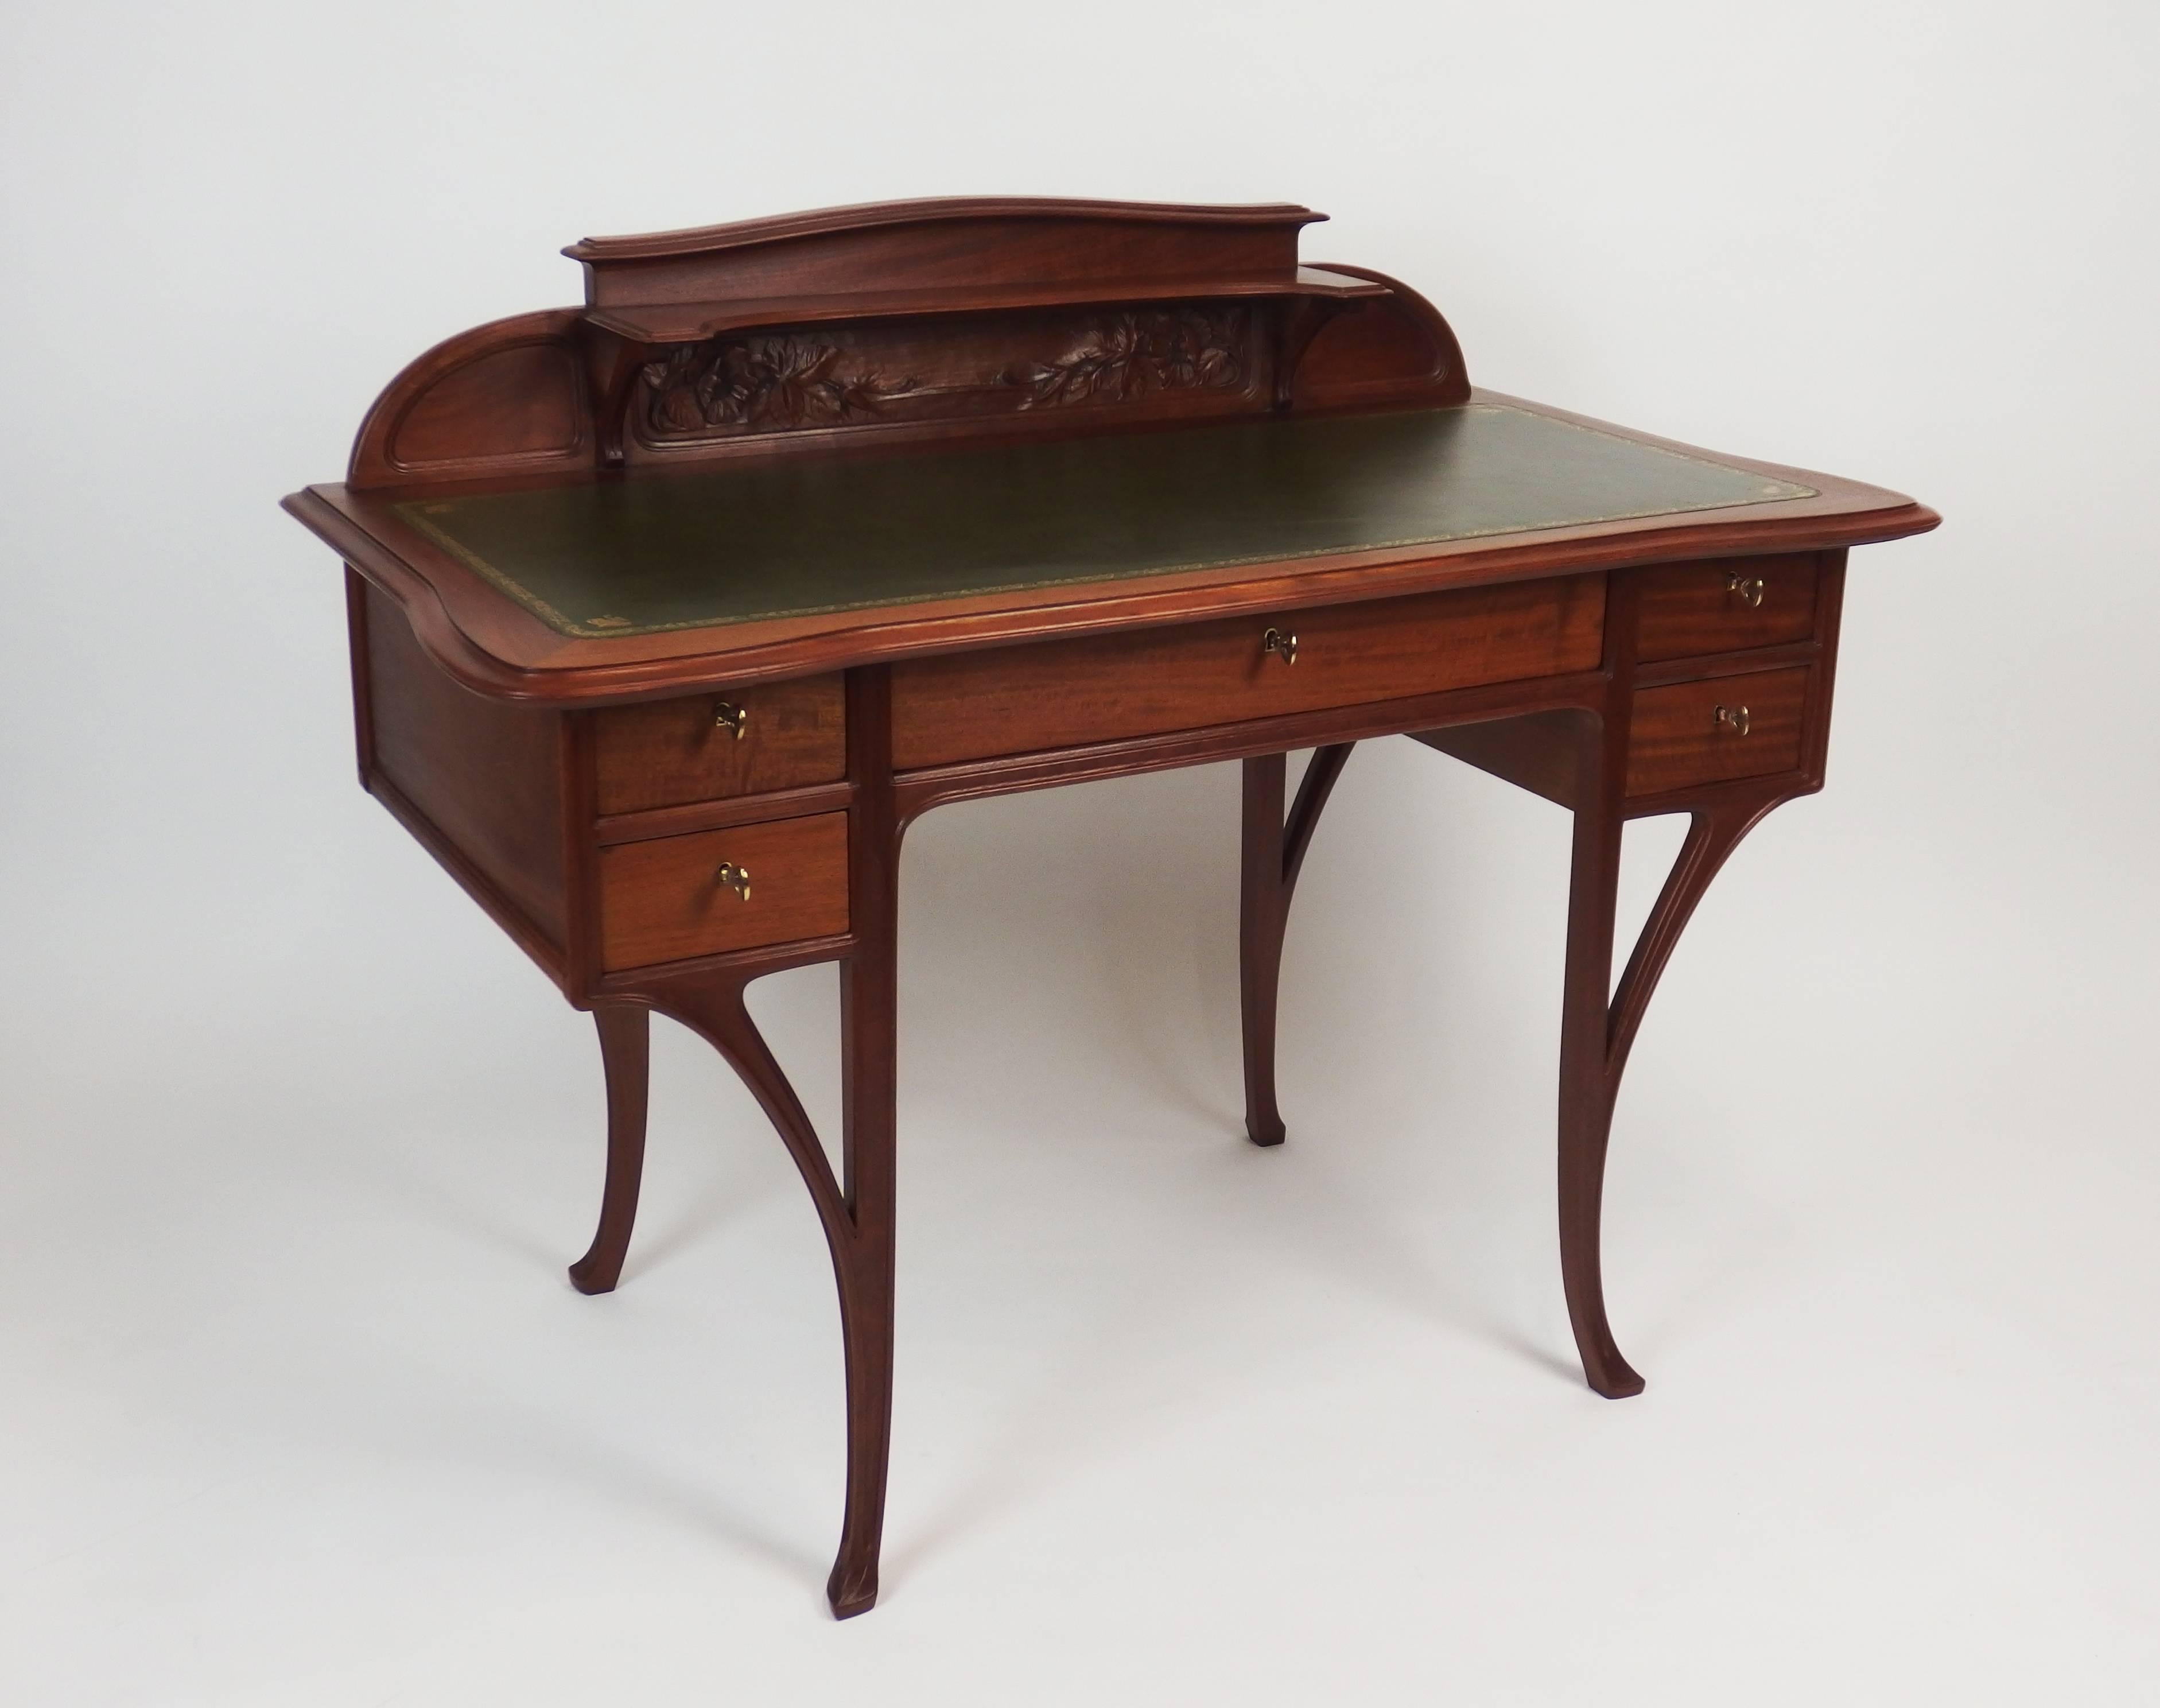 French Art Nouveau Mahogany Desk by Edouard Diot